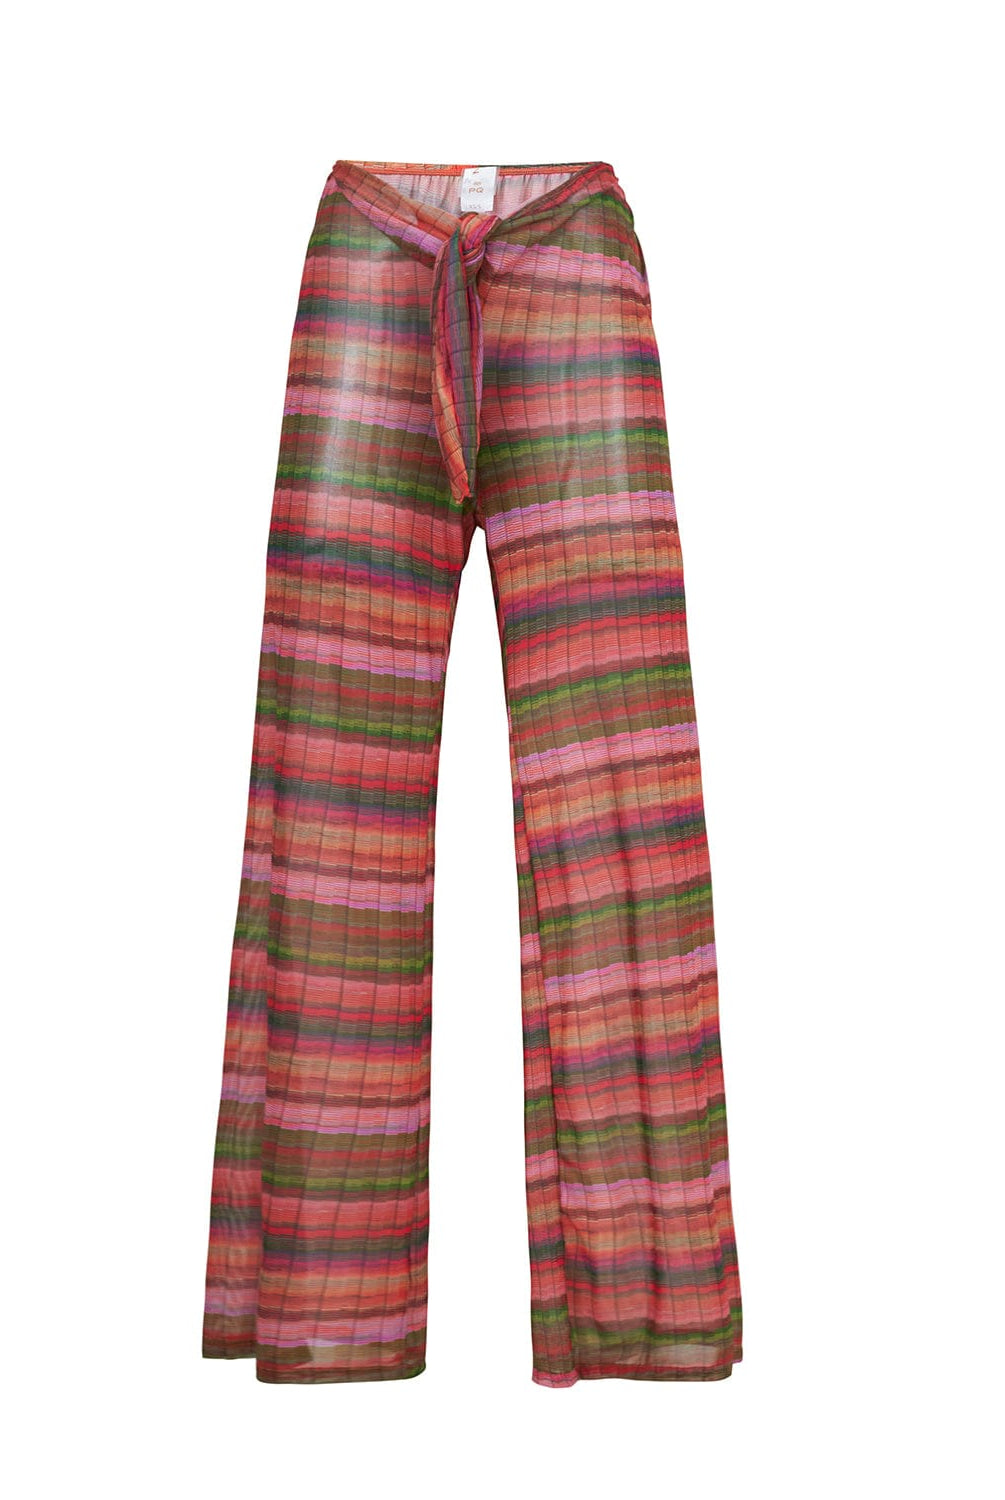 A pair of multi-colored stripe print textured pants. Featured against a white wall background.